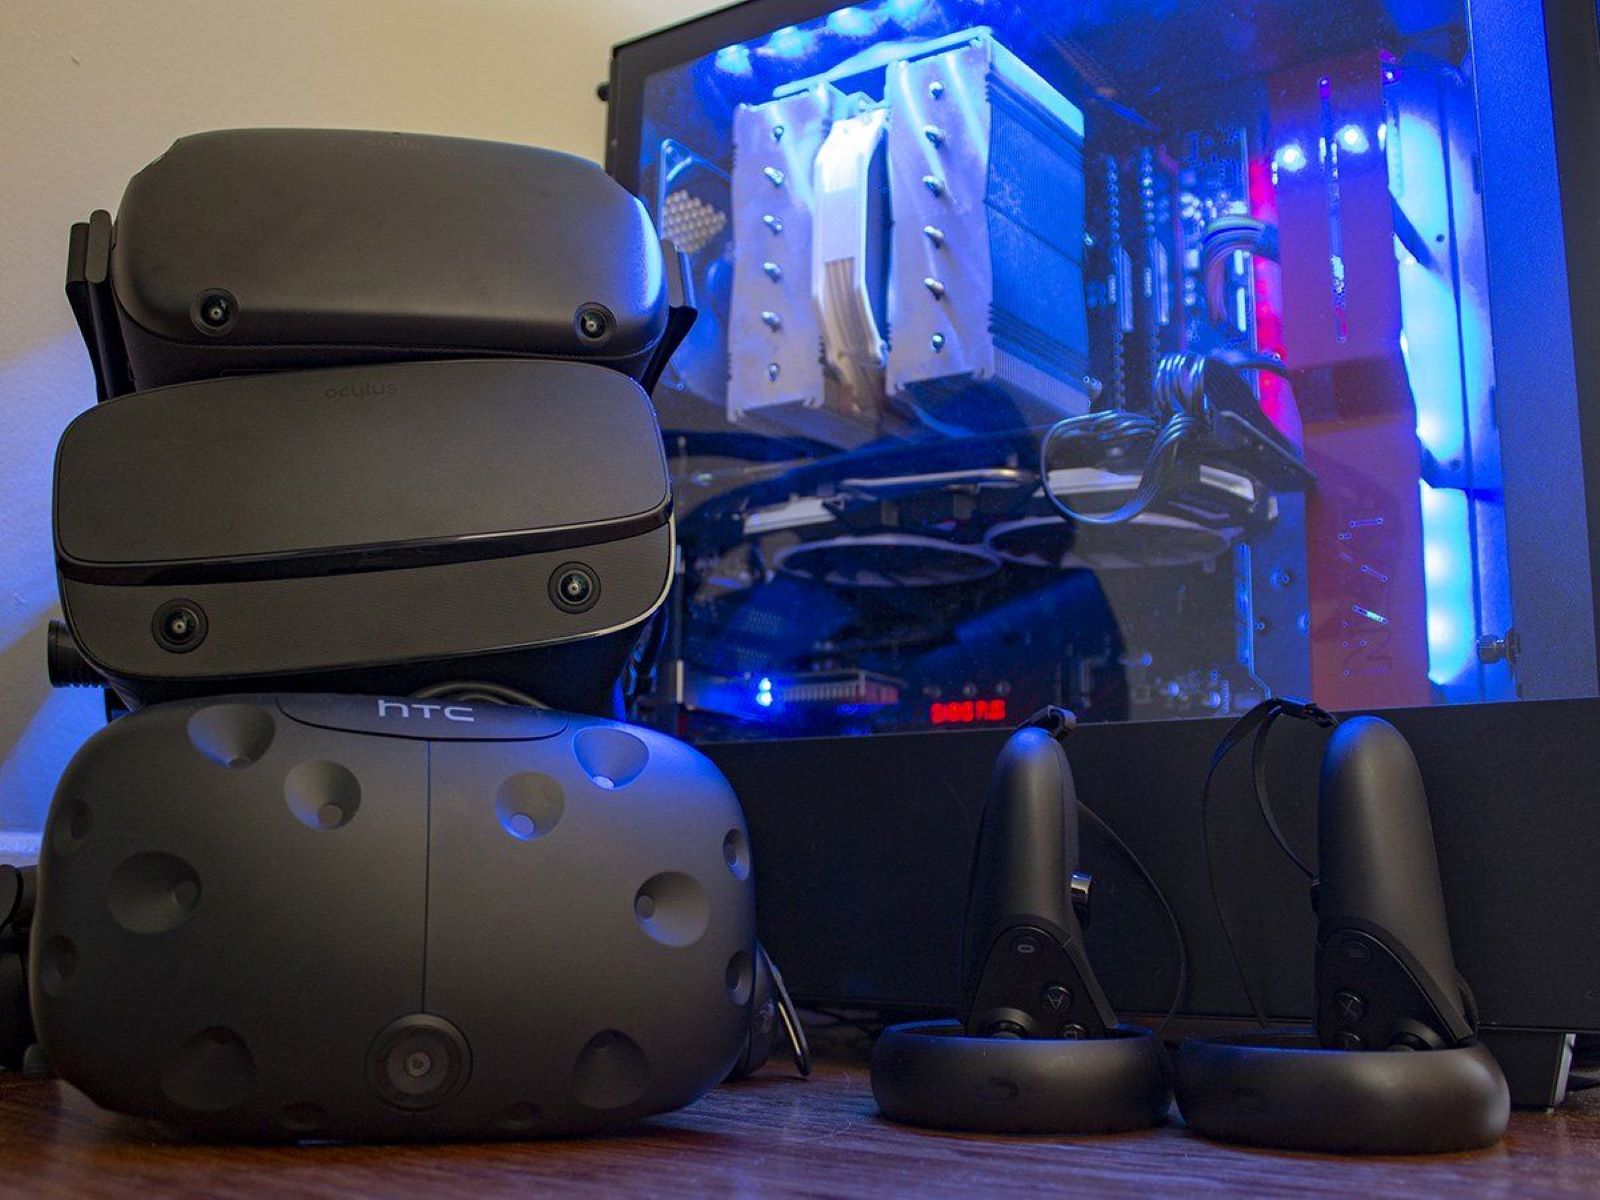 What PC Works Best With HTC Vive